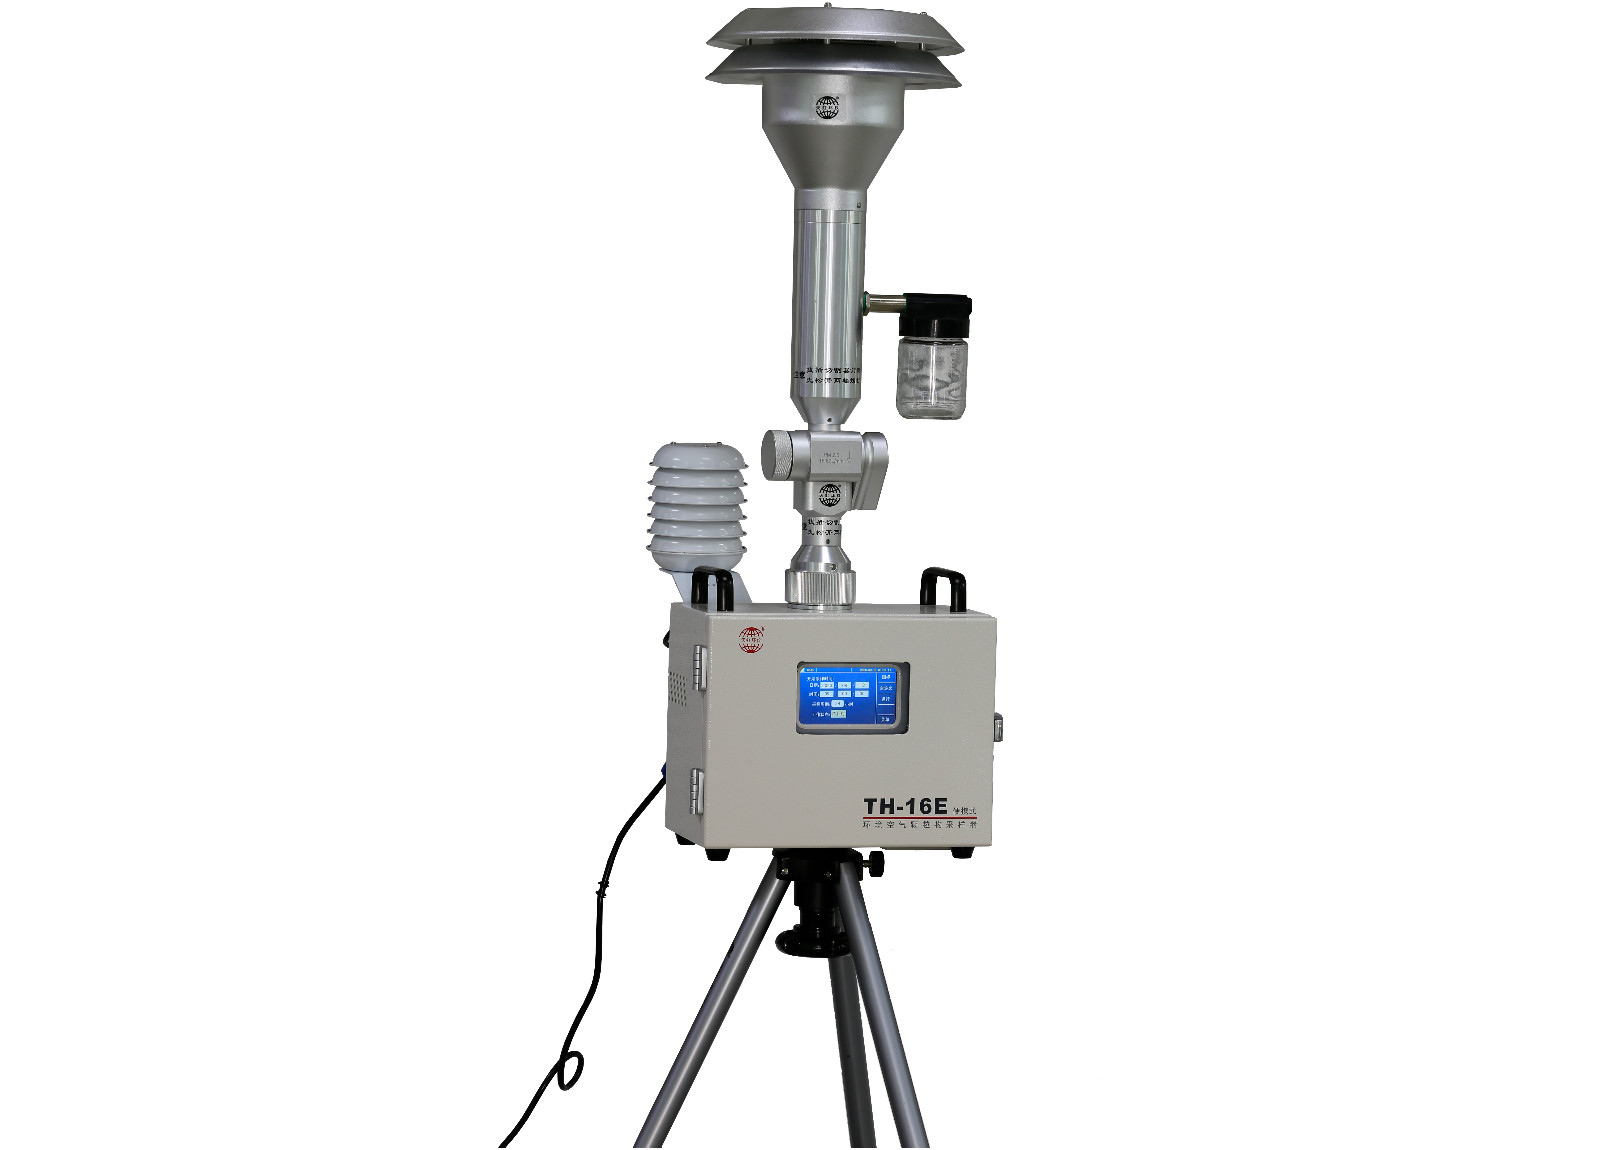 Th-16e (portable) ambient air particulate matter sampler